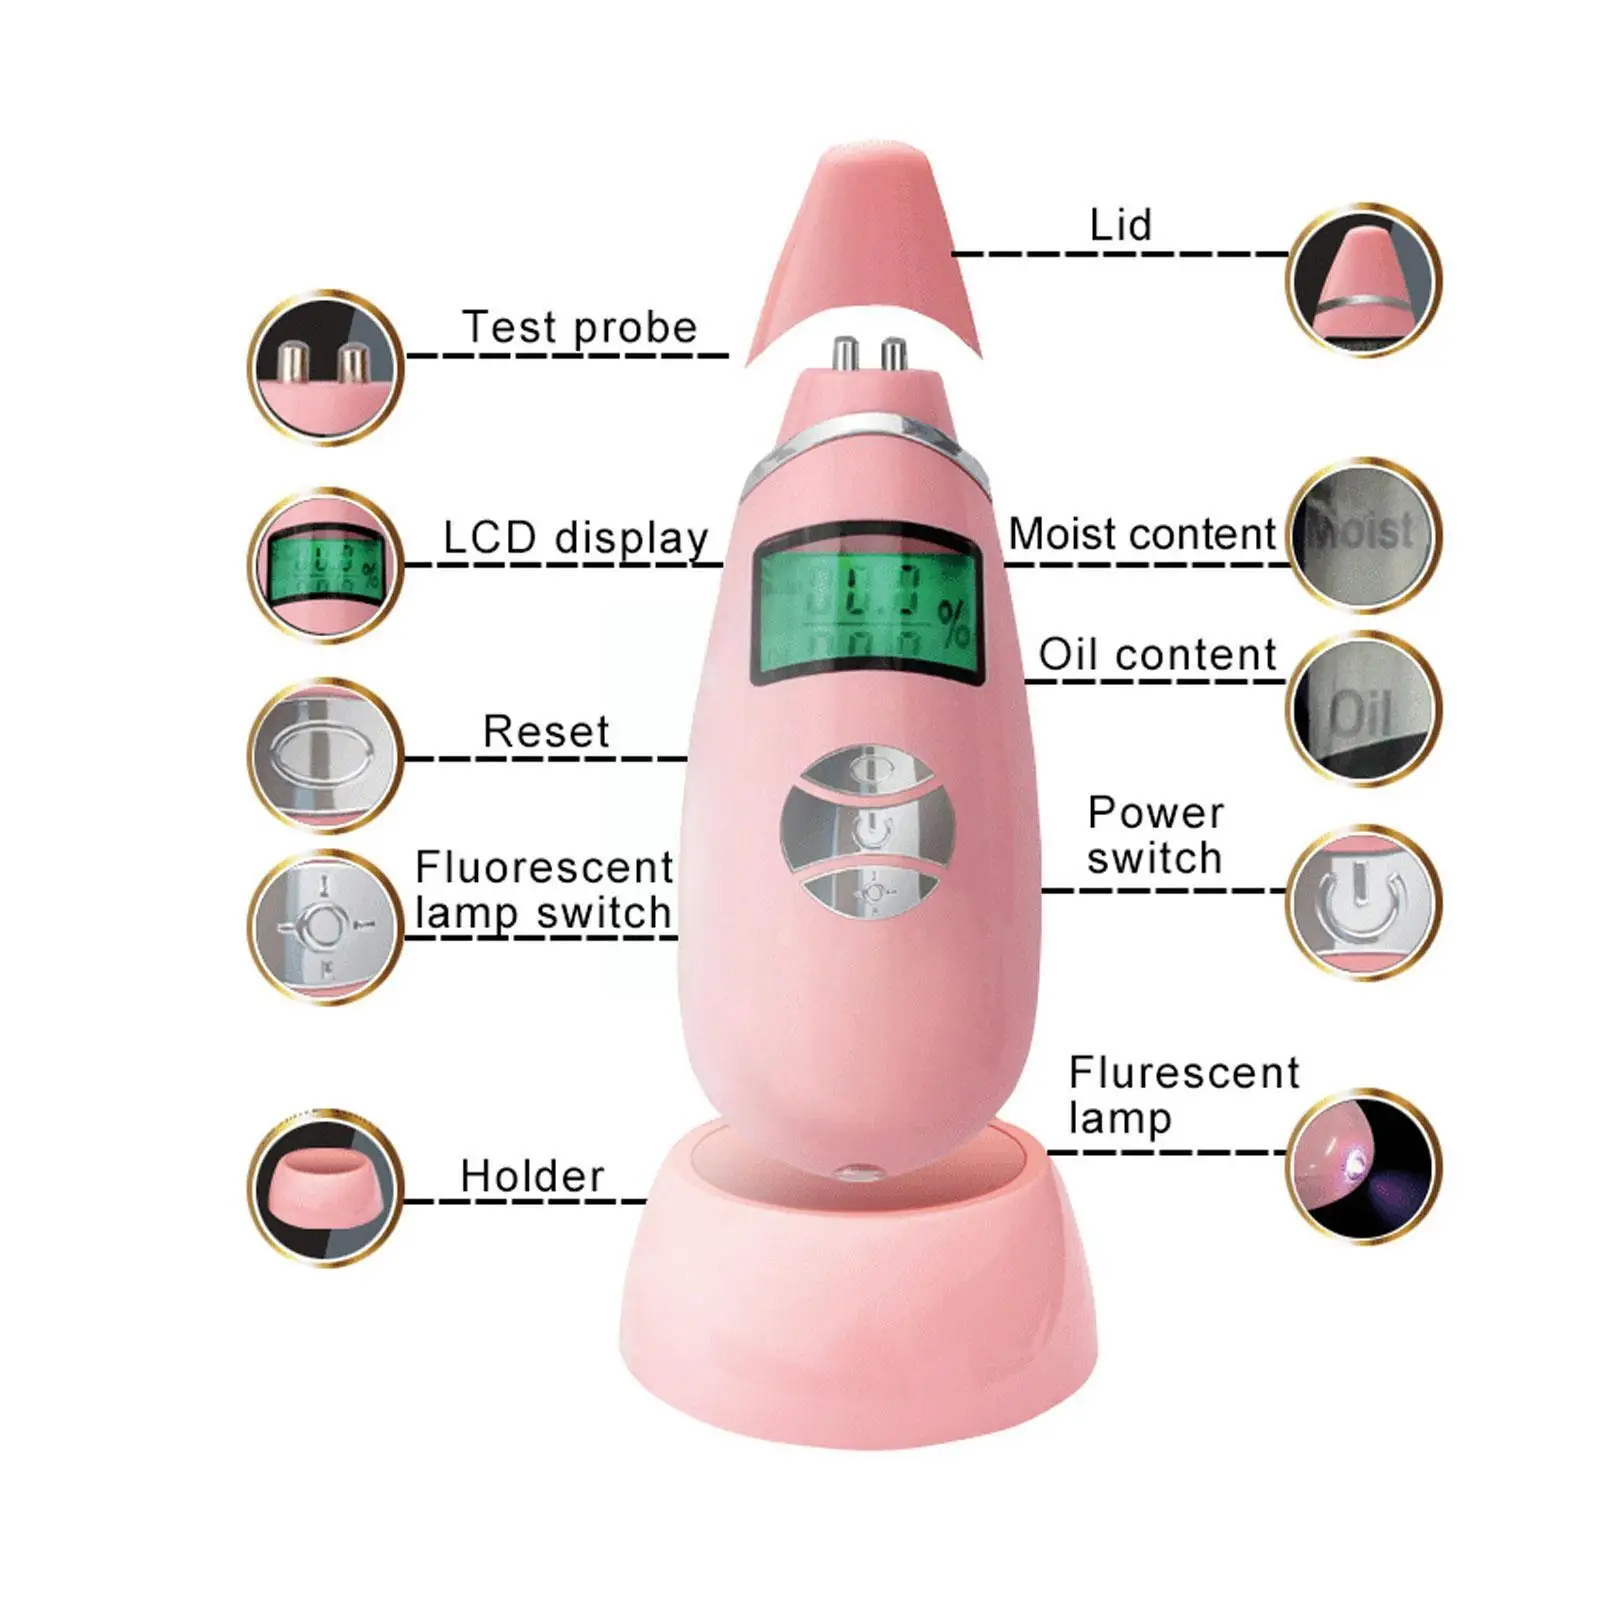 Skin Oil Moisture Tester Skin Analyzer Face Humidity Care Monitor Meter Bio-technology Tools Sensor Water Lcd Spa Display S D1m1 images - 6